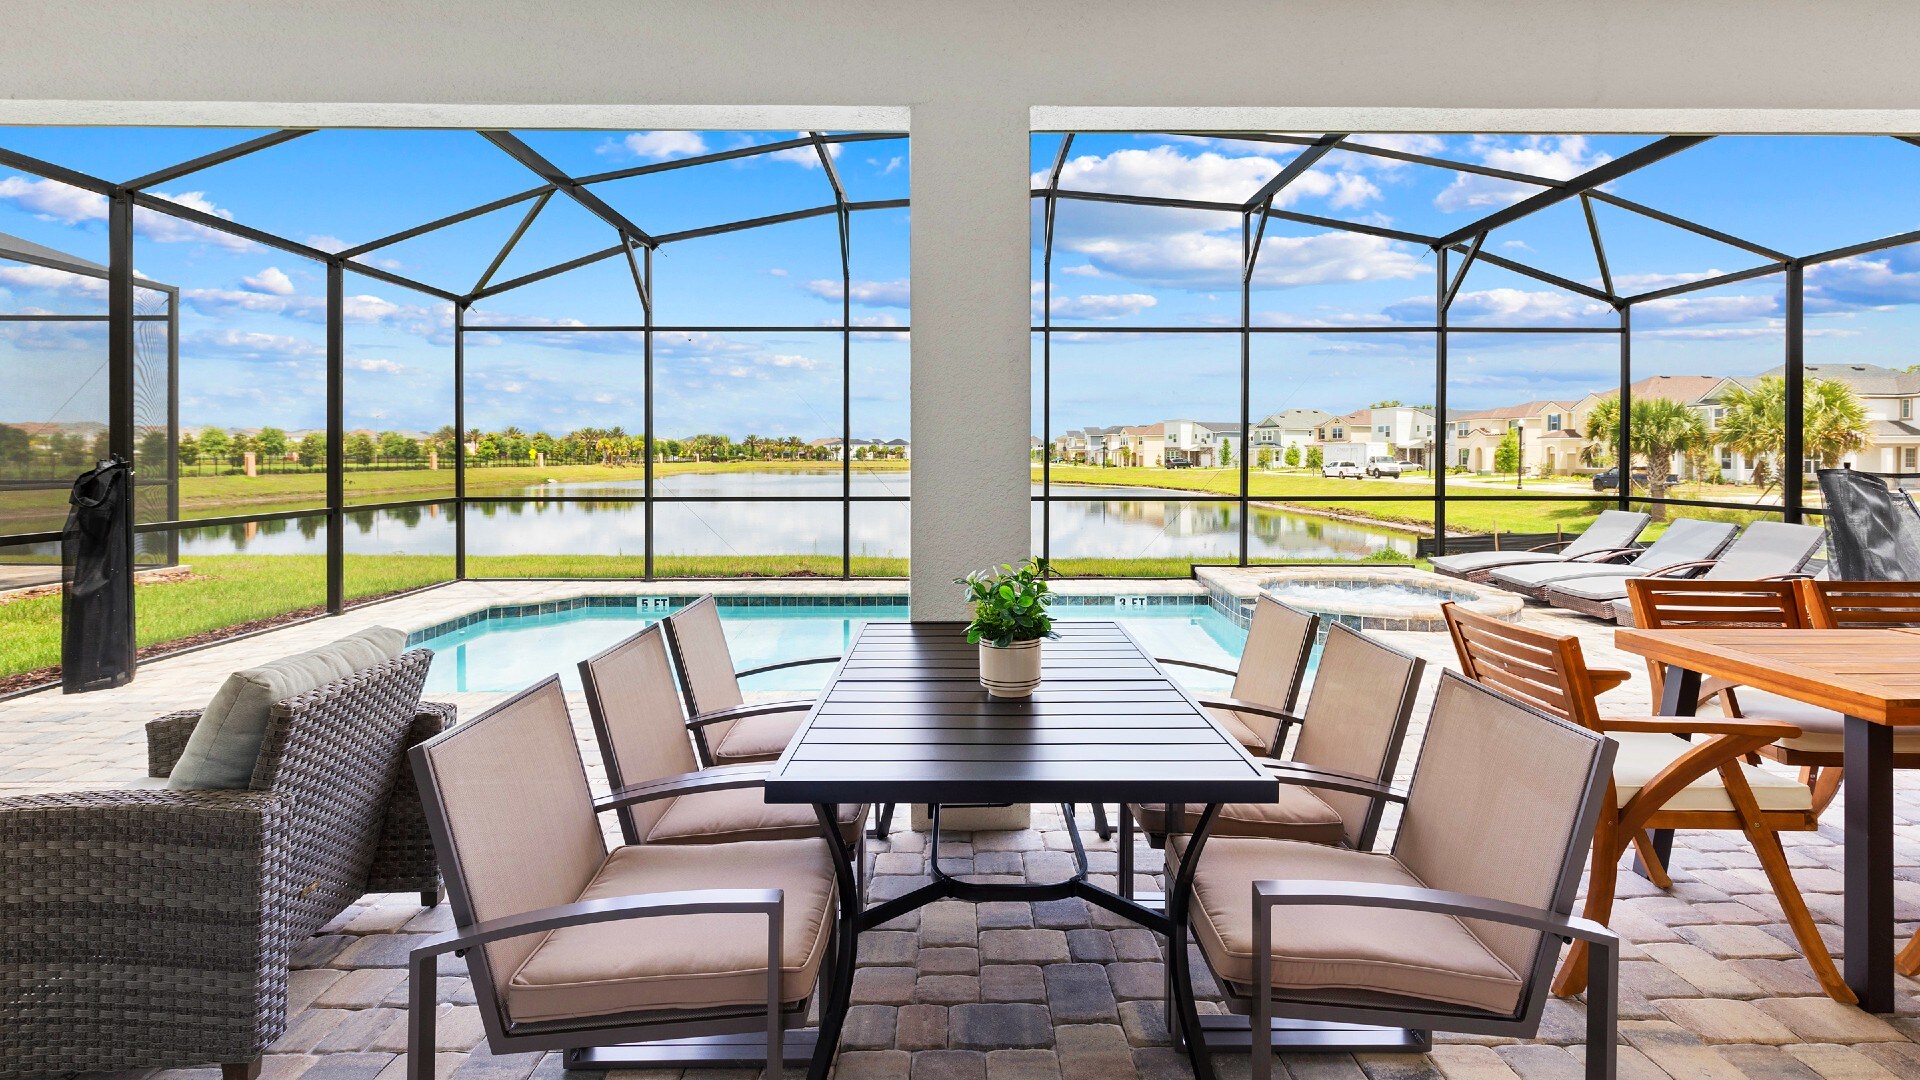 Enjoy alfresco dining out on the covered lanai